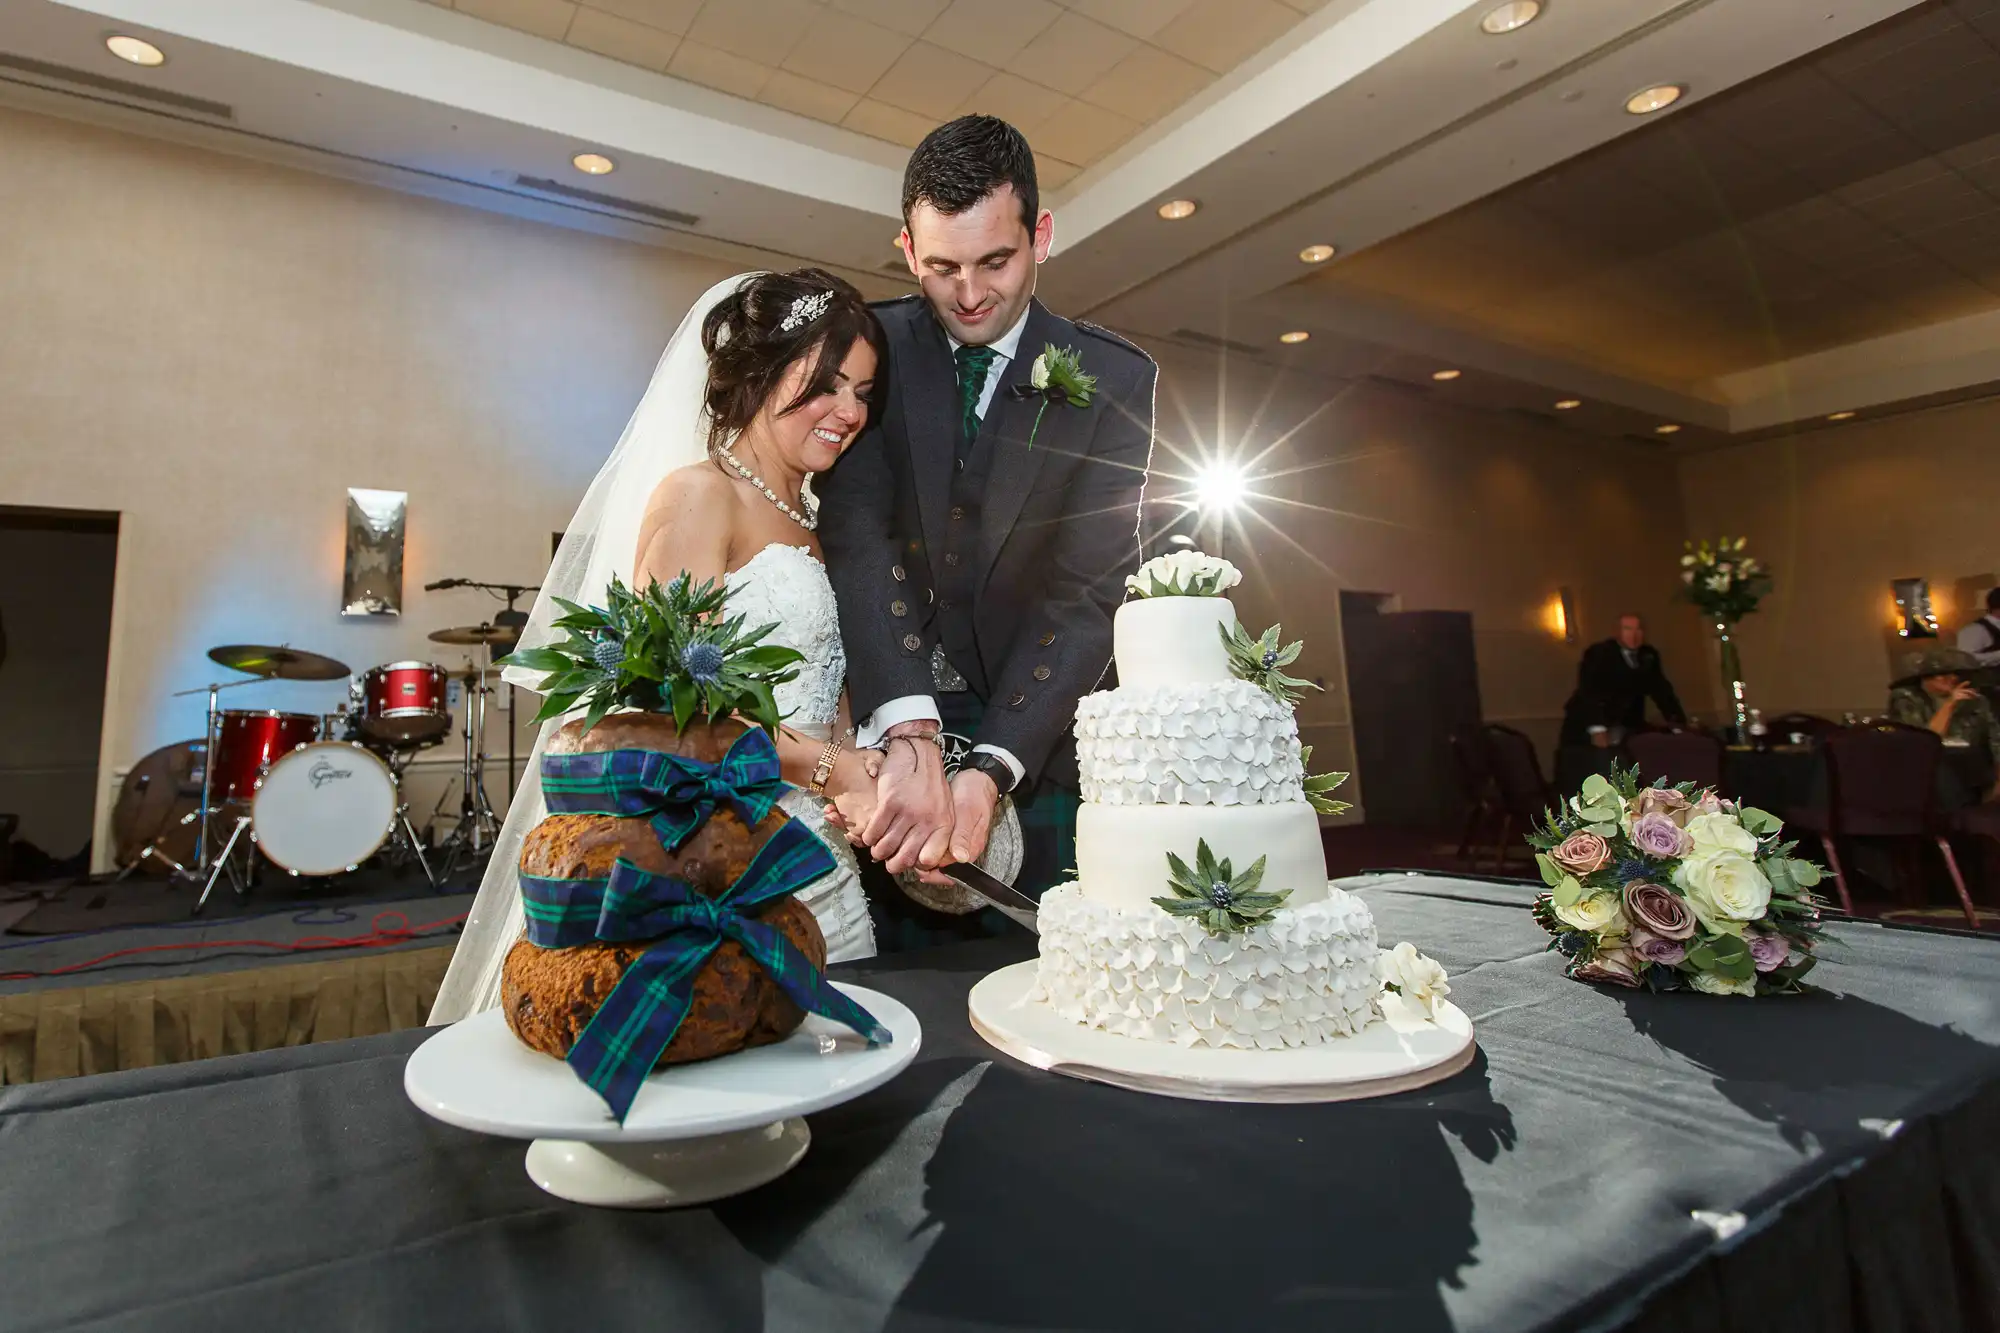 A bride and groom cutting their wedding cake, smiling, with a band setup in the background.